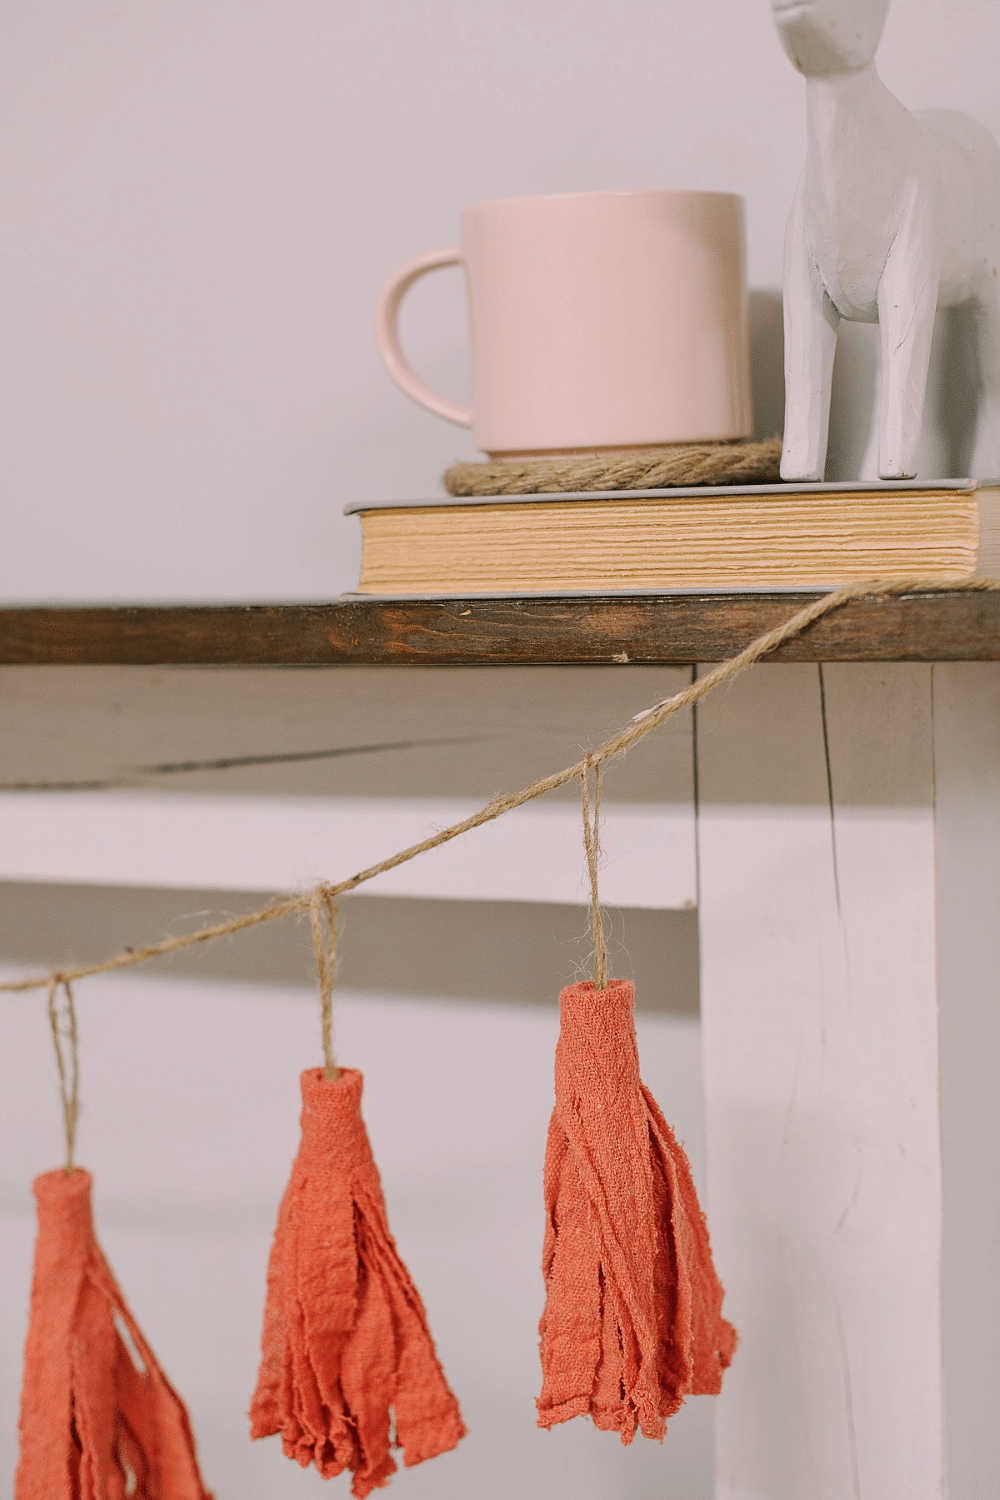 How to Make a Fabric Tassel Garland